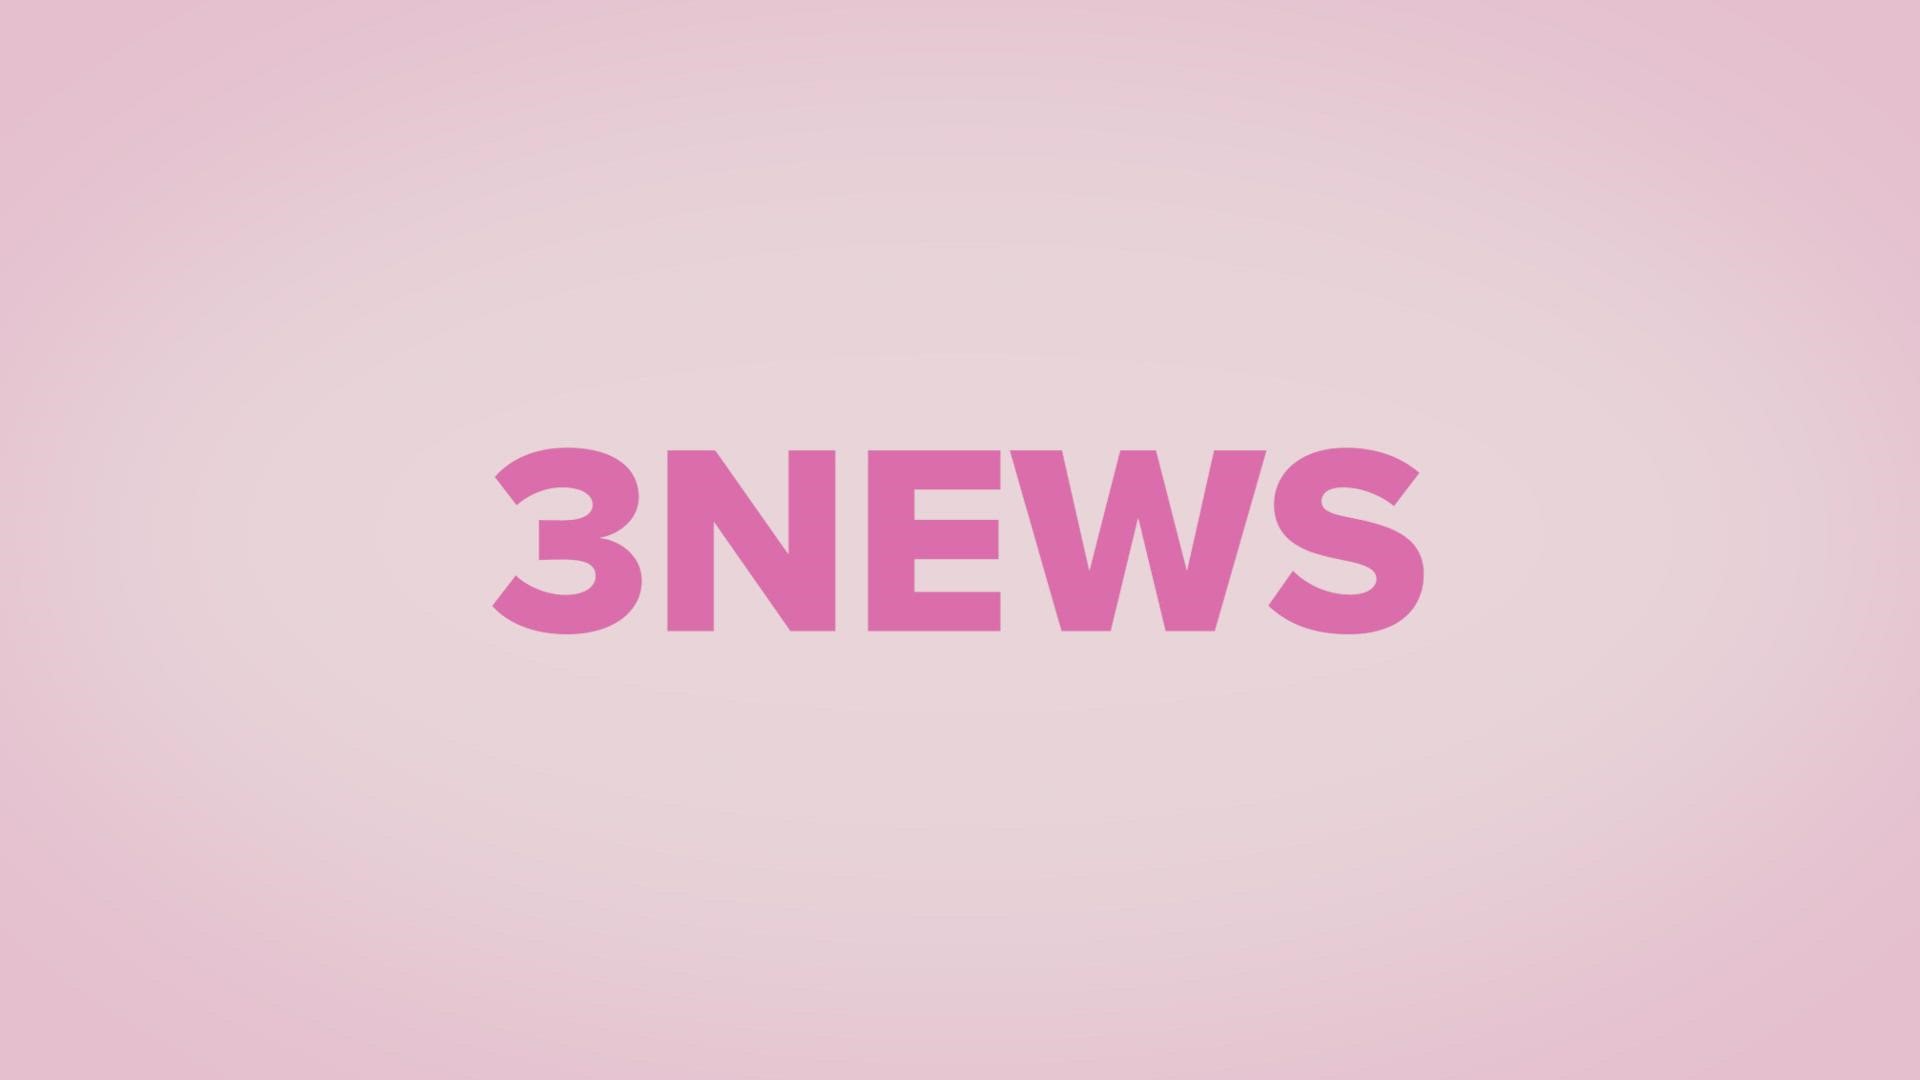 As Danielle Wiggins celebrates the 6-month mark of being cancer-free, 3News has new stories to inform and inspire you -- plus a very special pink ribbon.